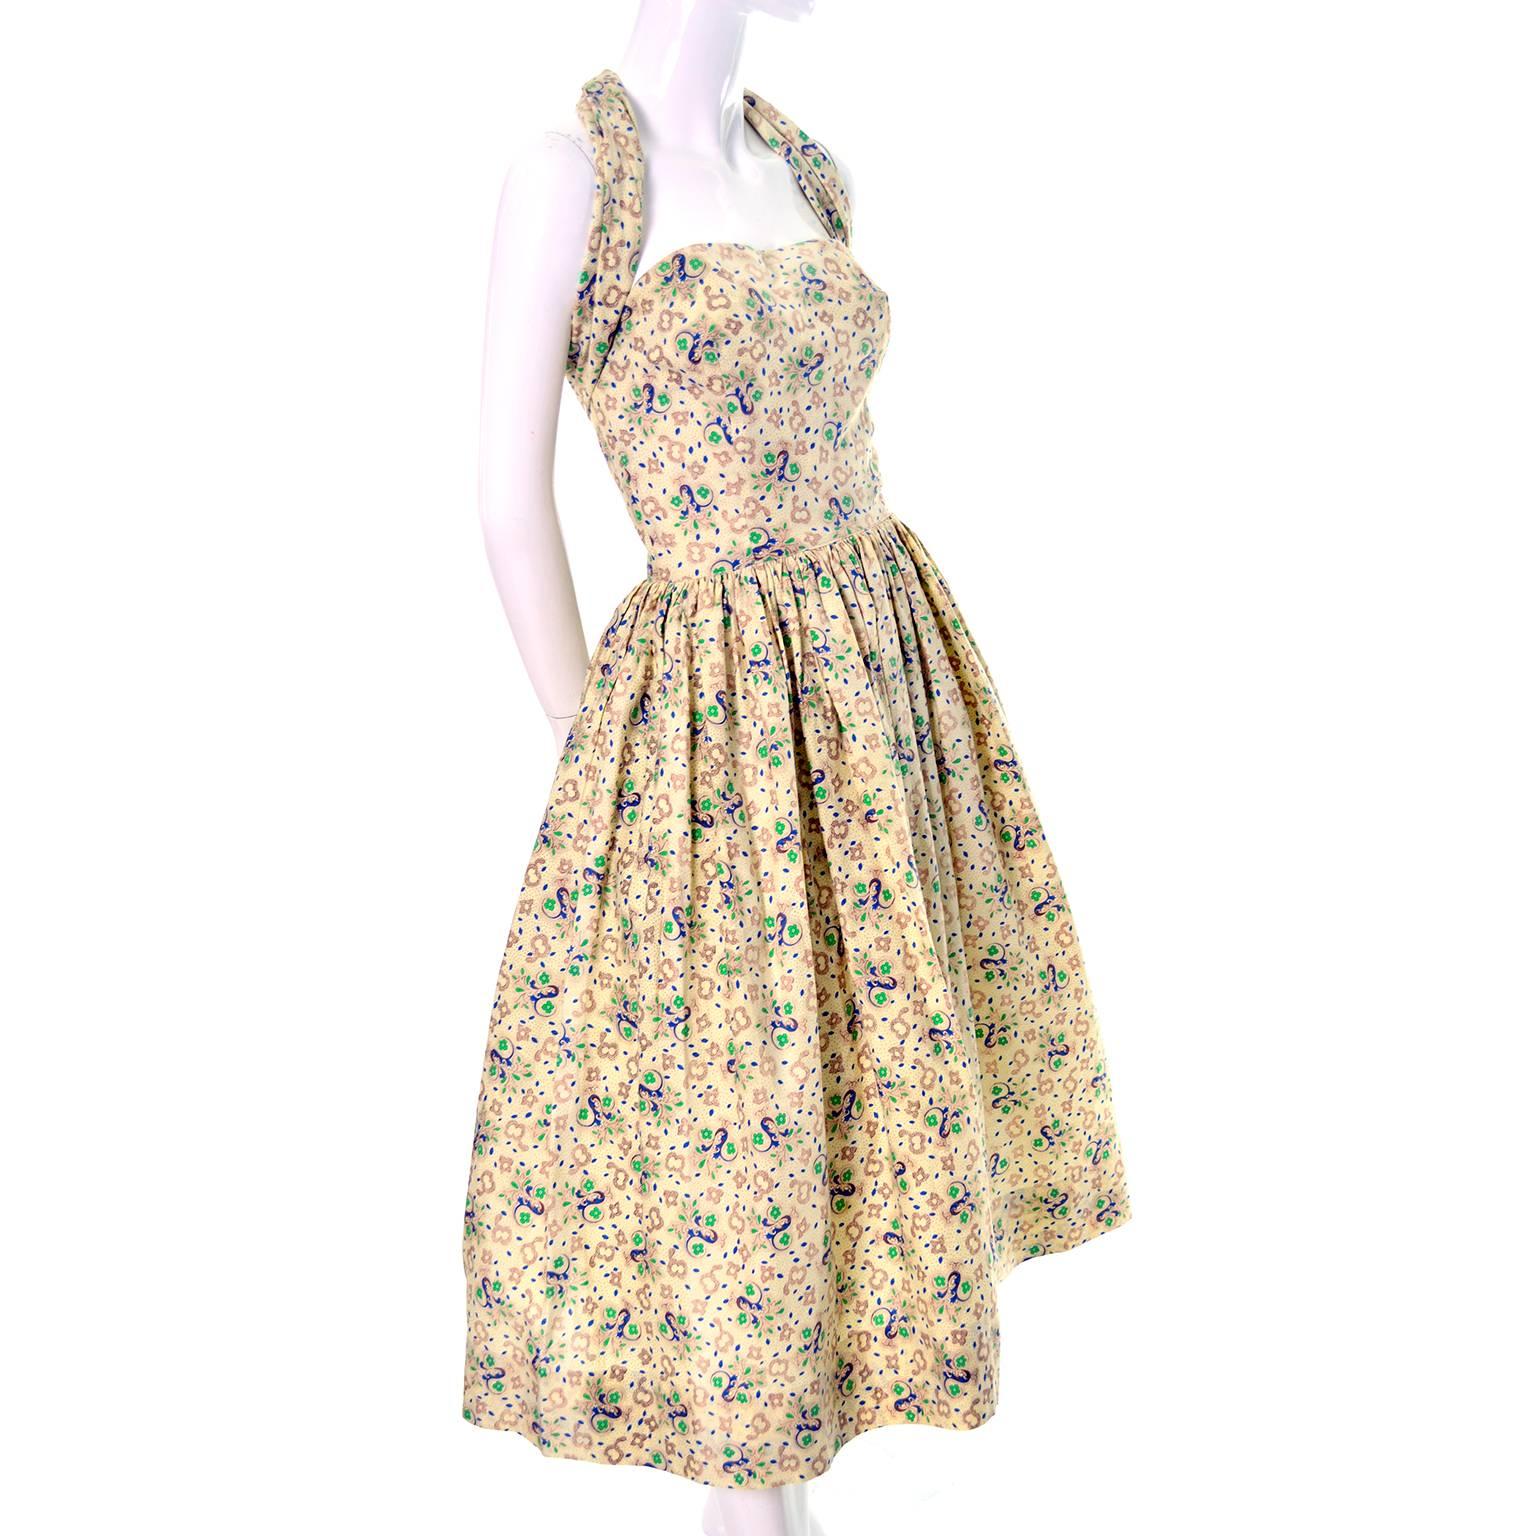 This cotton 1950's vintage dress was designed by the famous mid century designer Carolyn Schnurer.  The dress is strapless but has an attached piece of fabric that can be worn in a number of different ways as I have shown in the photographs. 